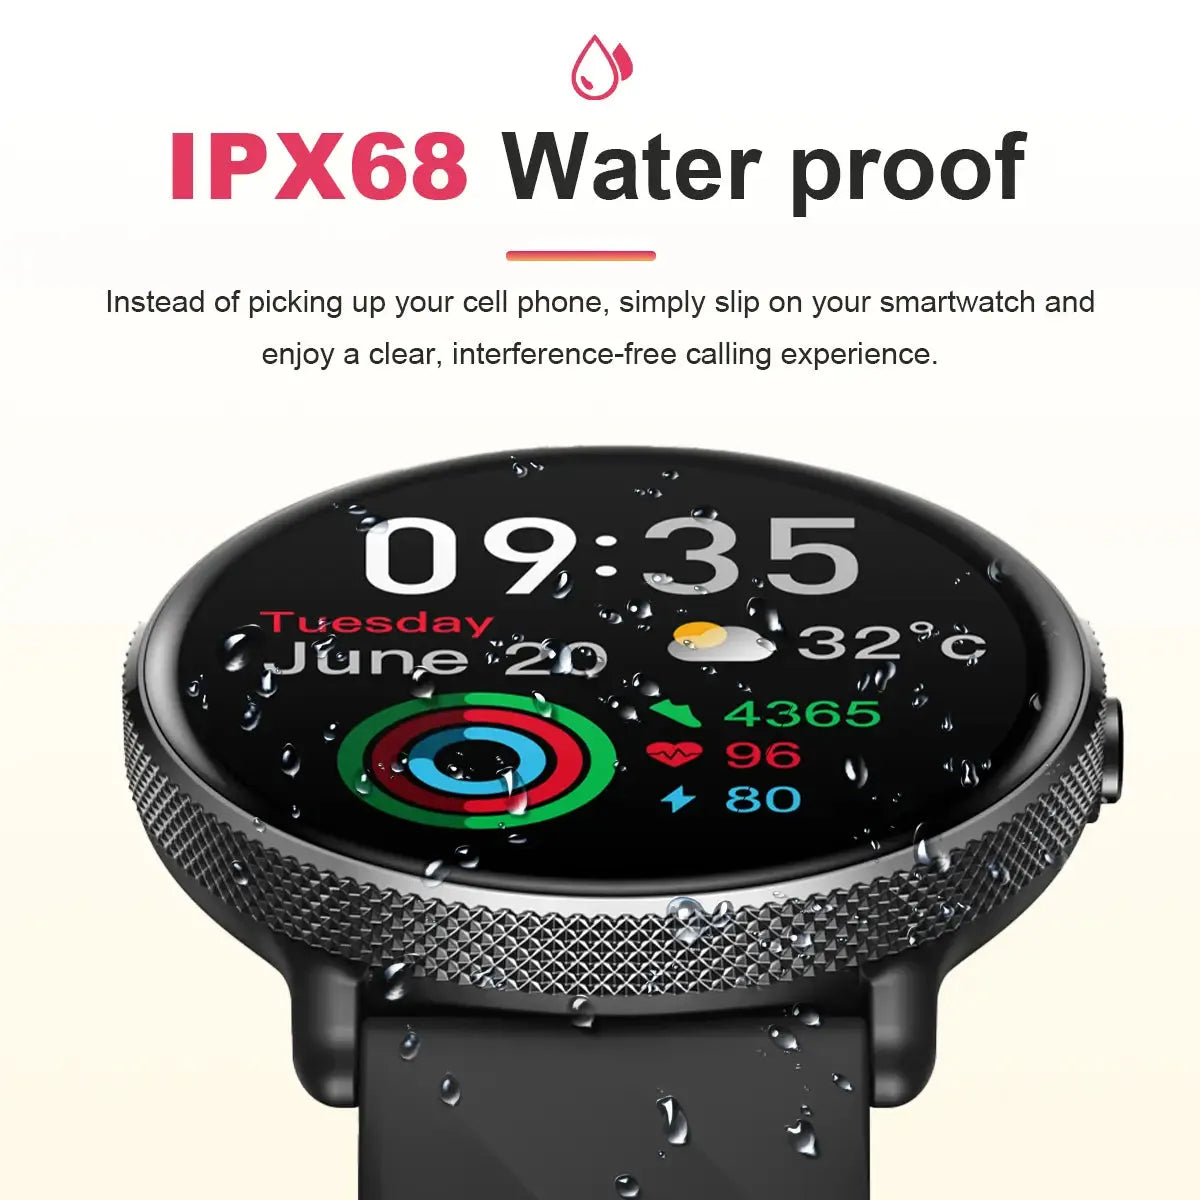 Tousains smartwatch P2 with ip68 waterproof